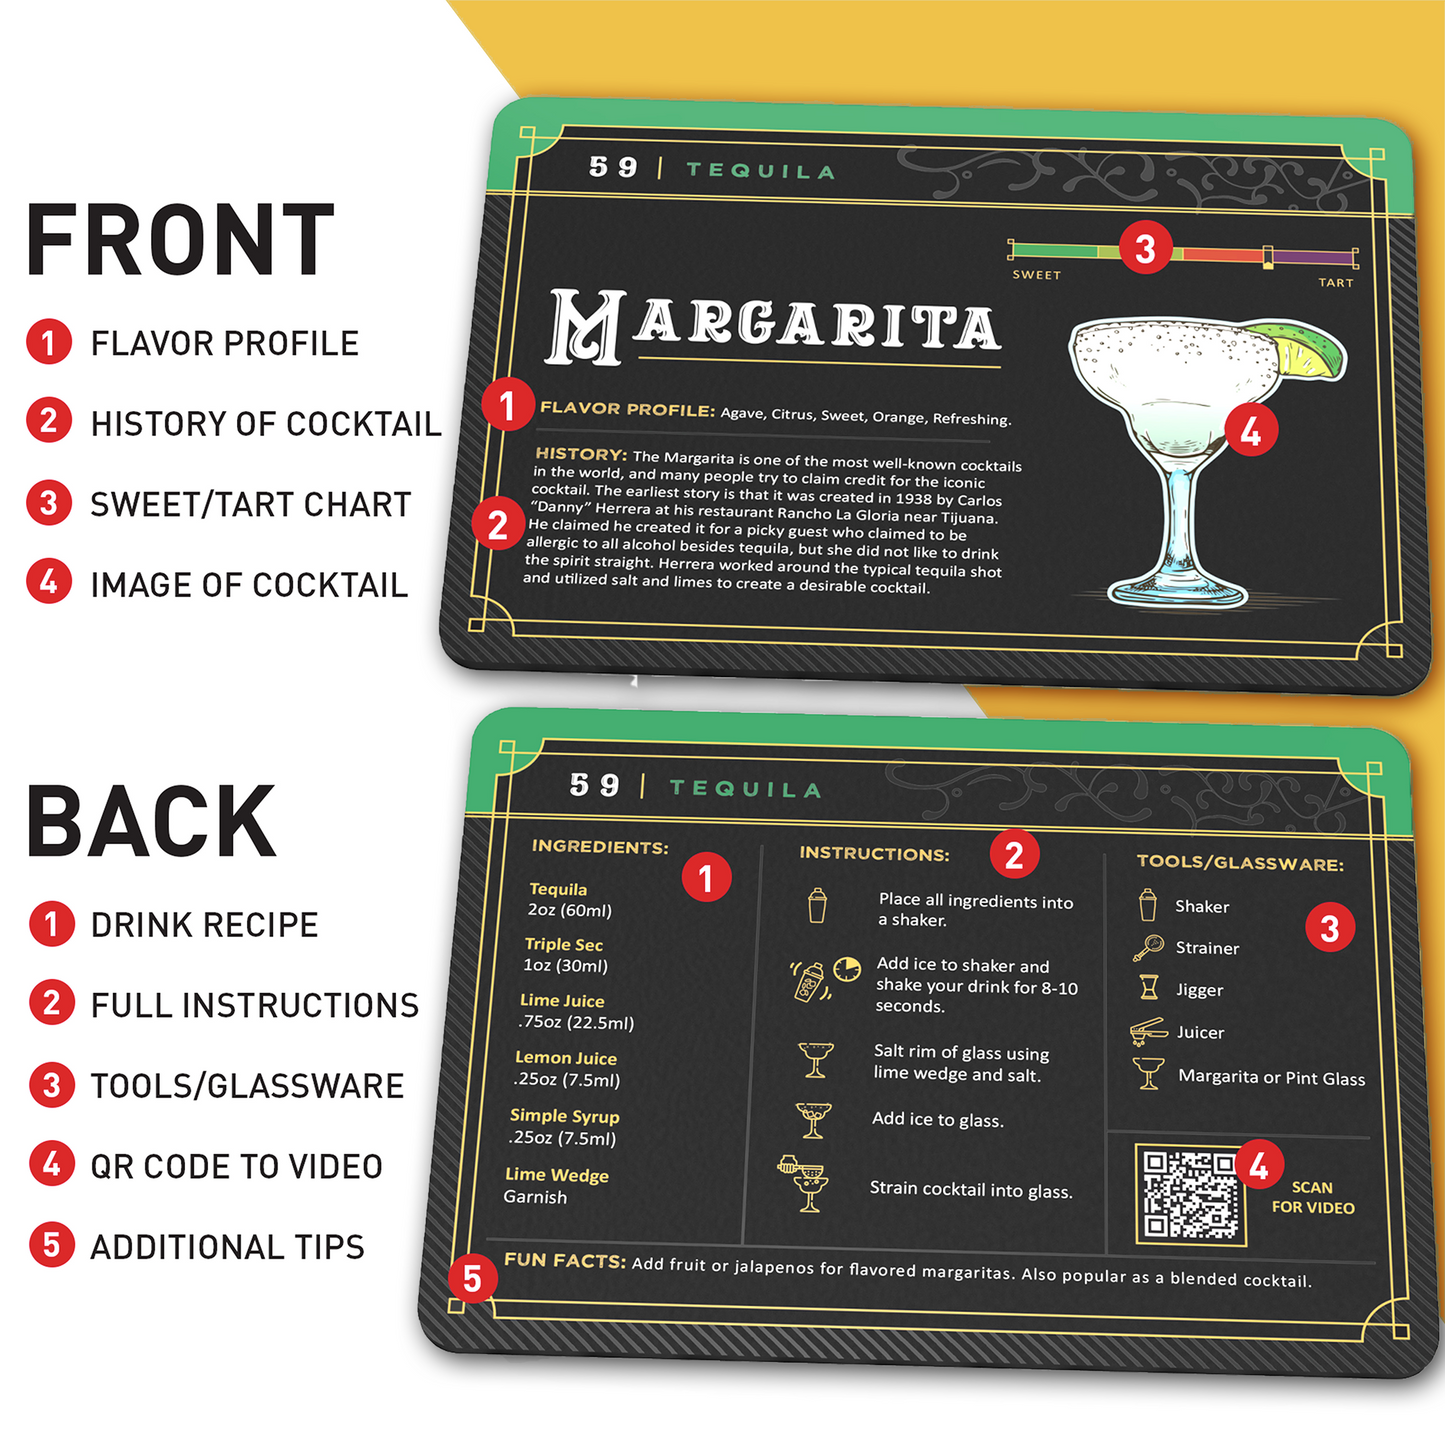 Features of each card includes Flavor profile, history of cocktail, sweet/tart chart, image of cocktail, drink recipe, full instructions, tools and glassware needed, qr code to instructional video, plus additional tips and tricks